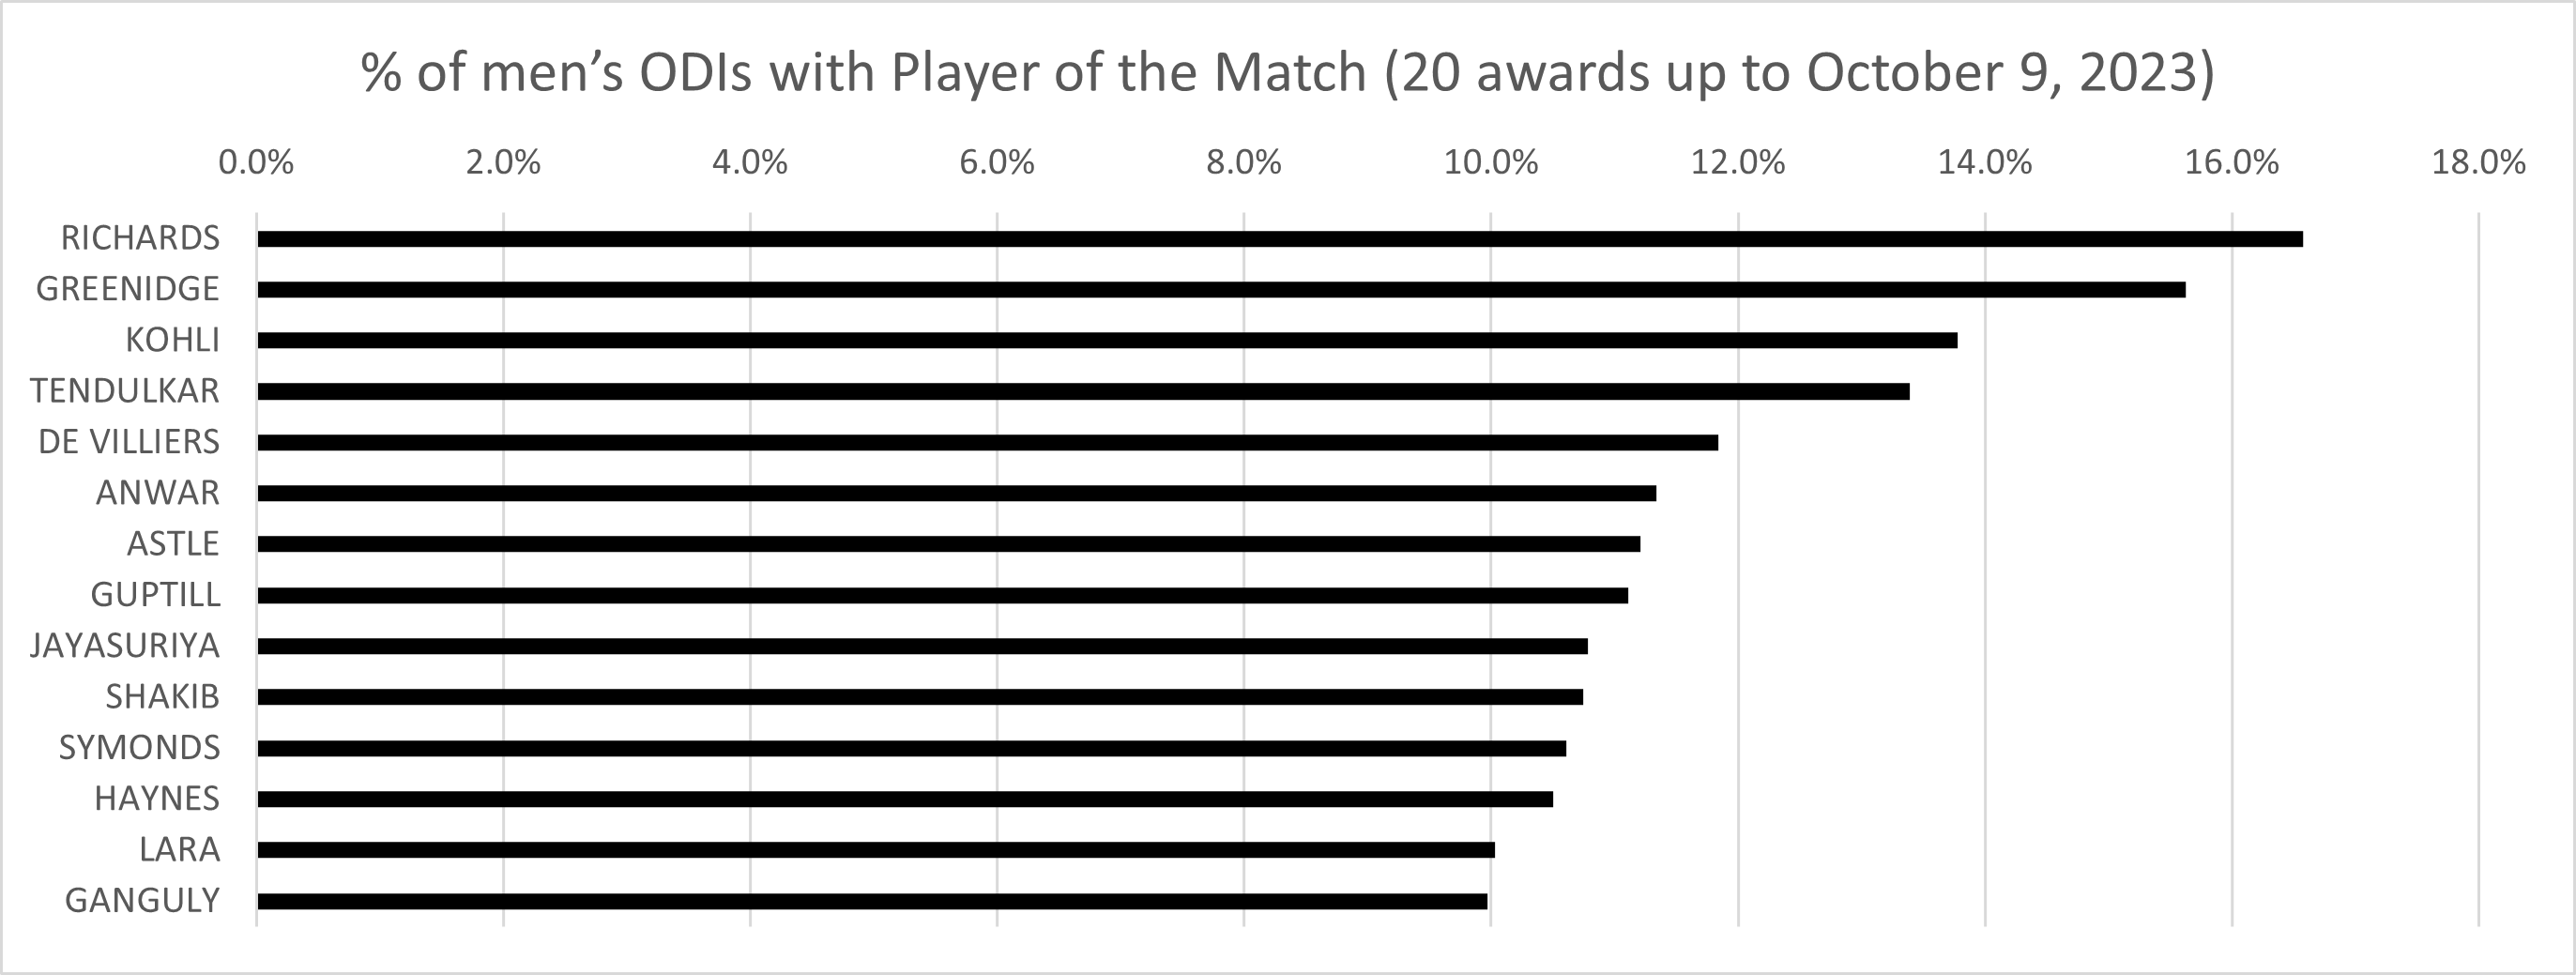 20 or more Player of the Match, men’s ODIs (10%)